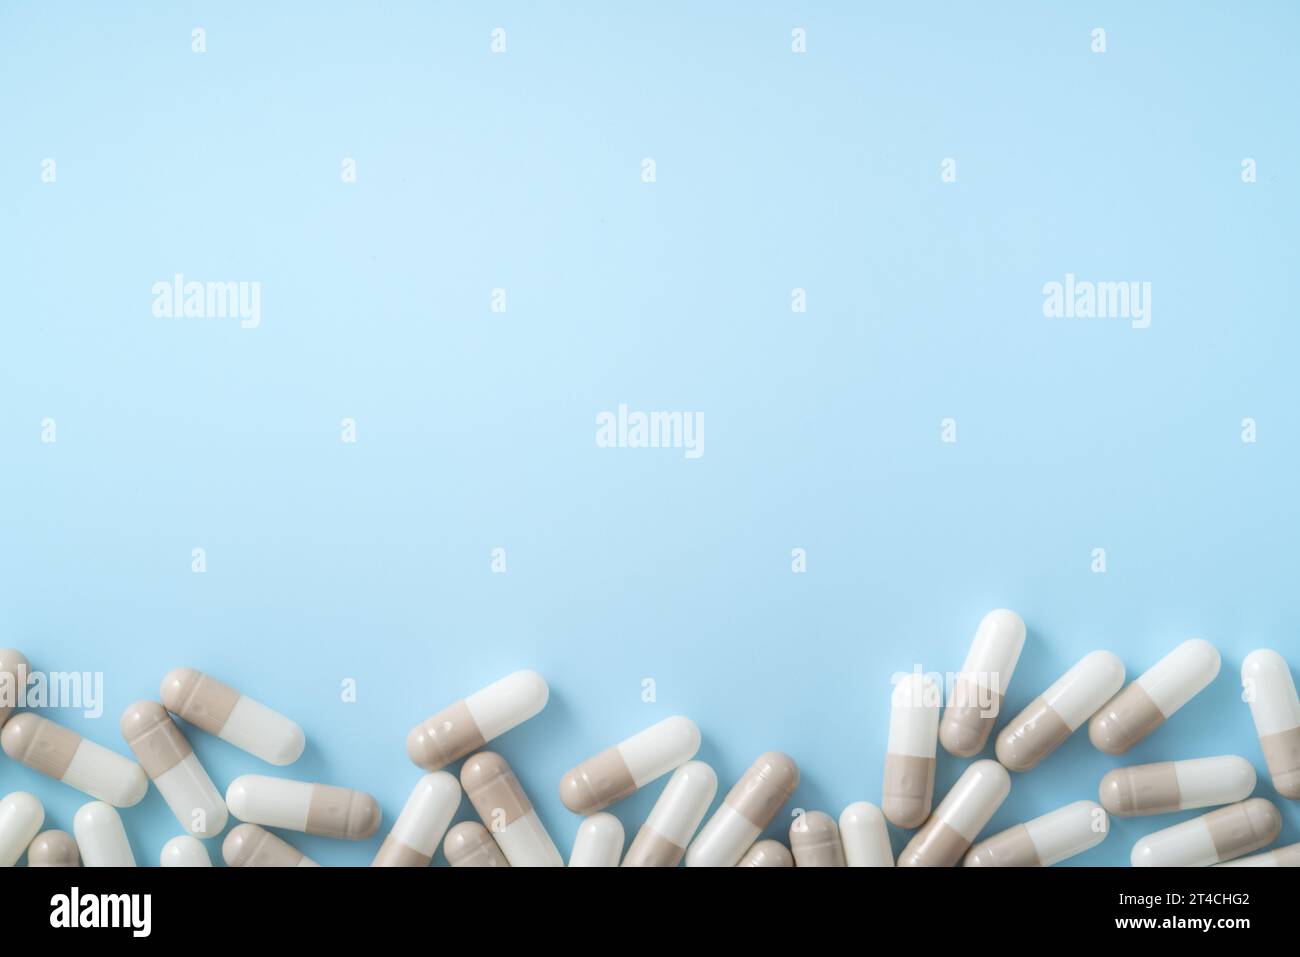 Taking medicine design concept, top view of capsule pills spilled over blue table background. Stock Photo